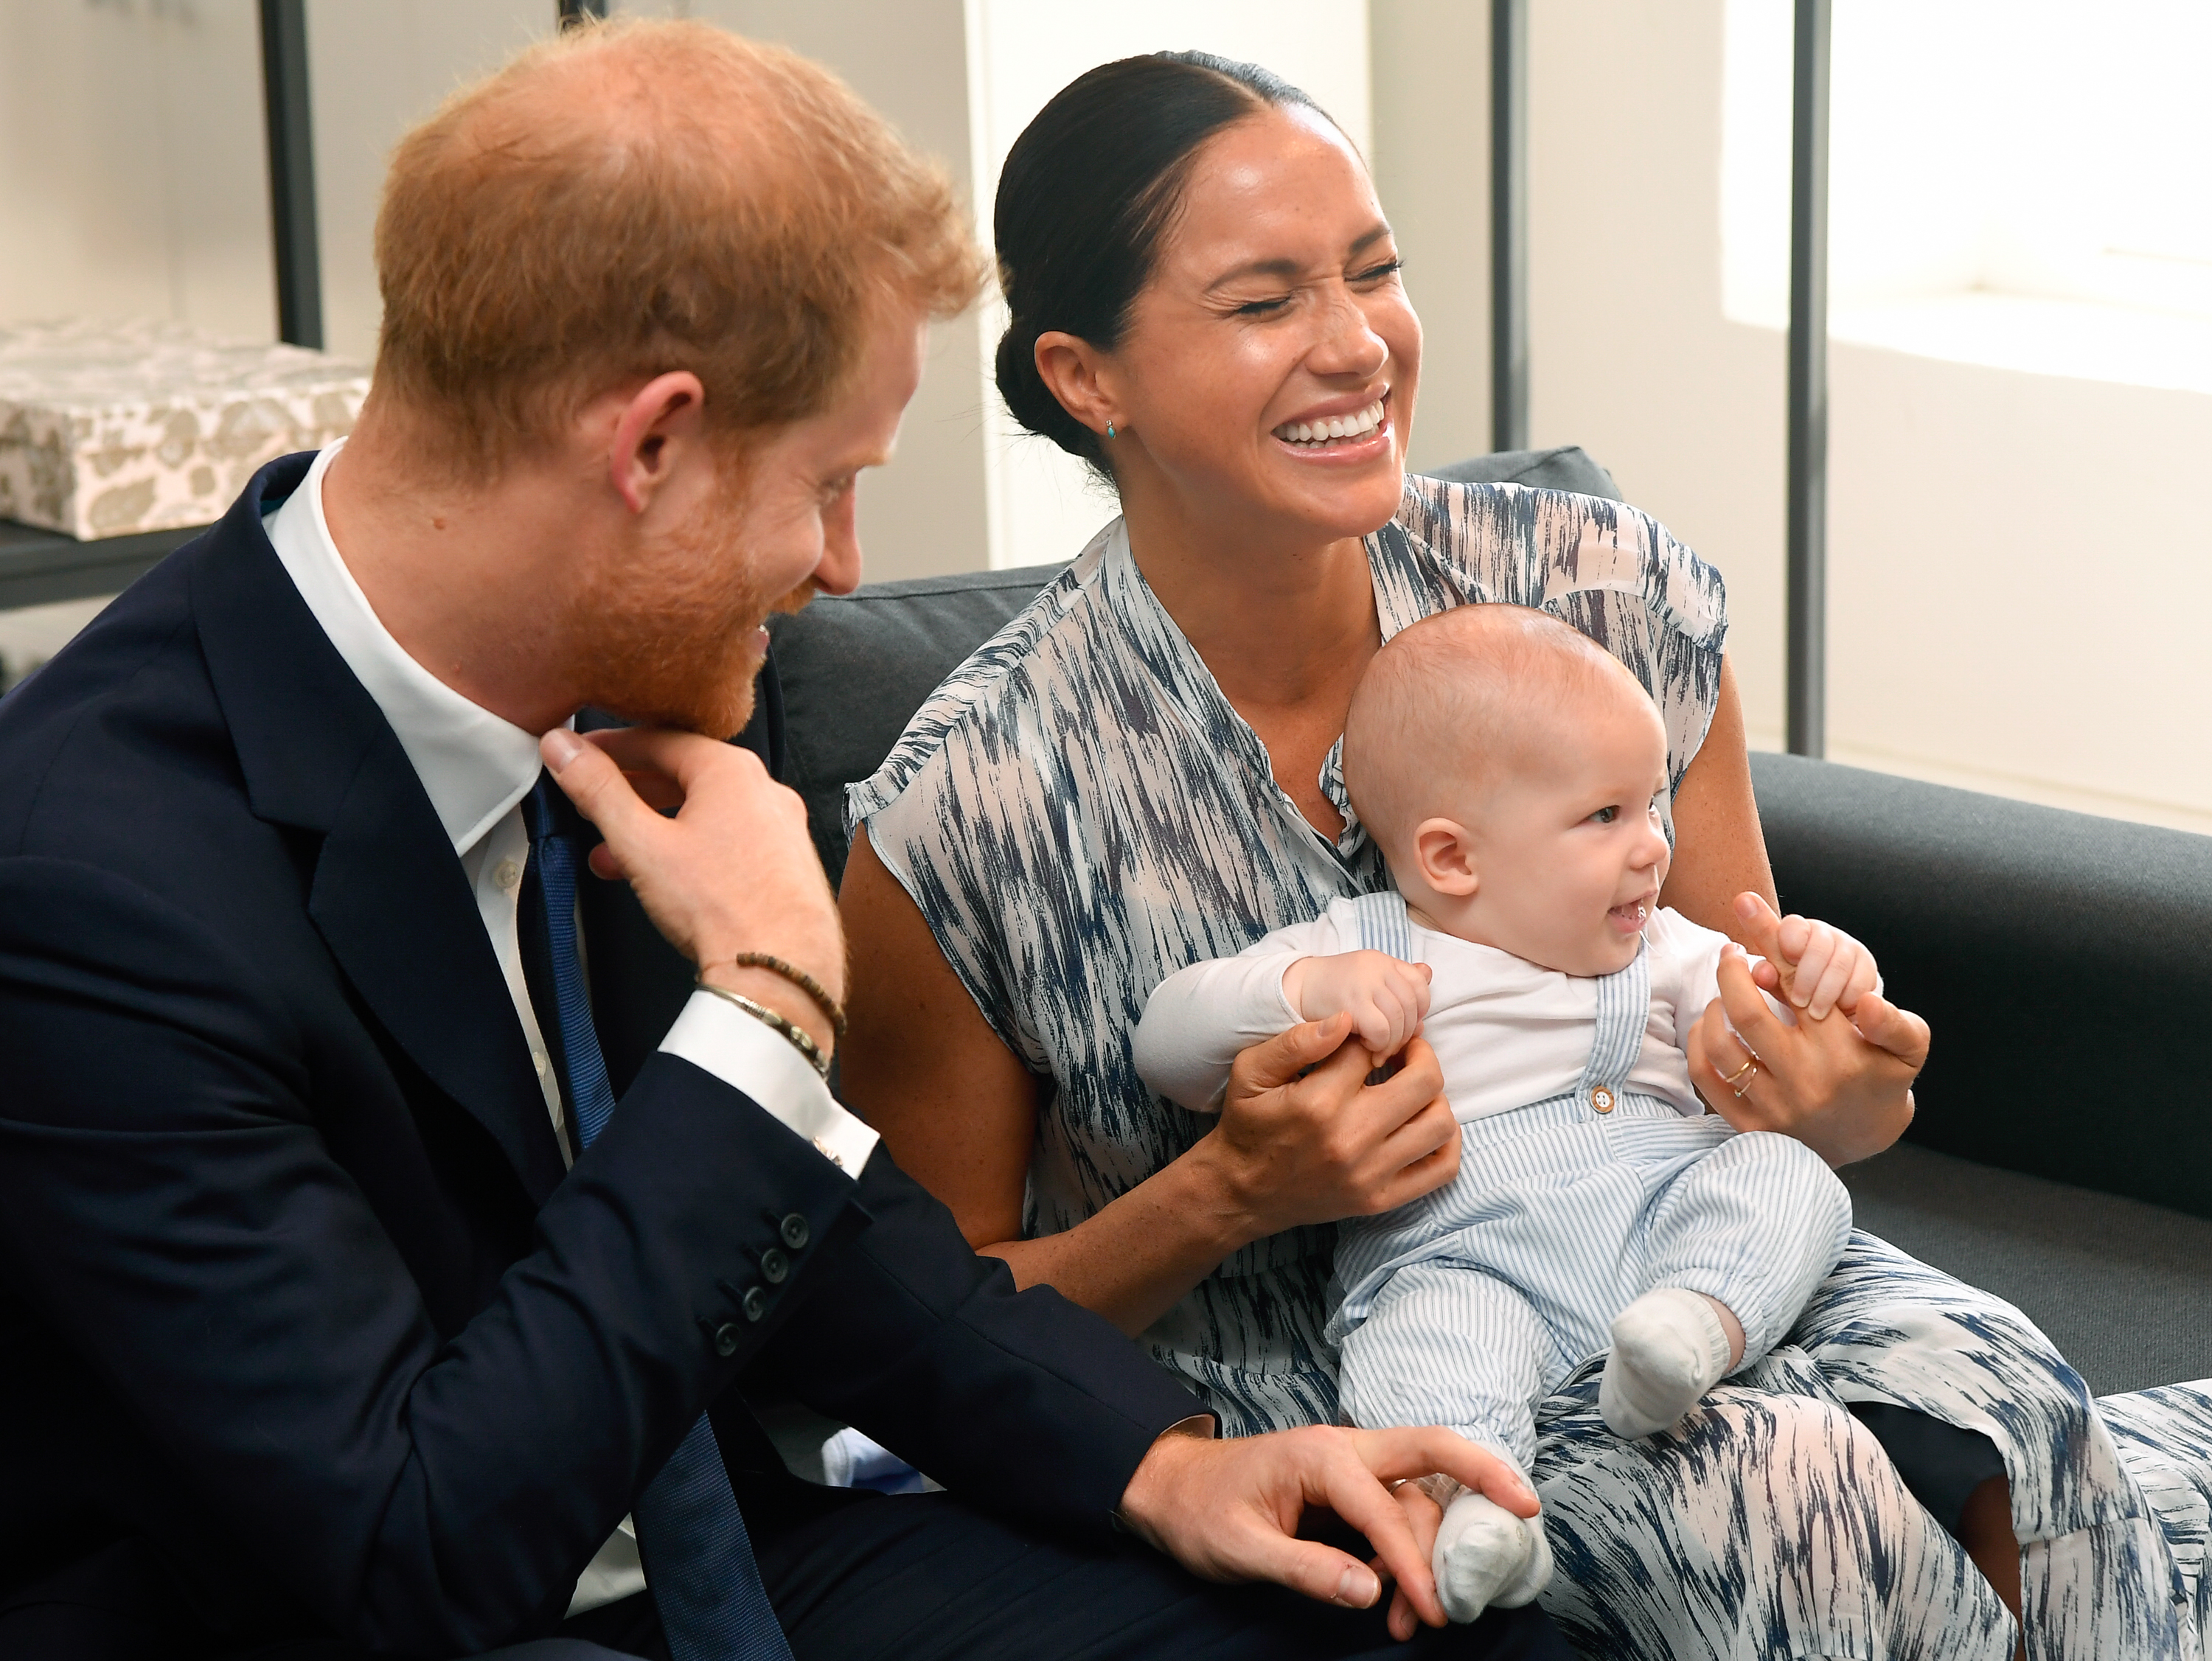 Meghan Markle, Prince Harry and their son, Archie Mountbatten-Windsor during their royal tour of South Africa on September 25, 2019 in Cape Town, South Africa